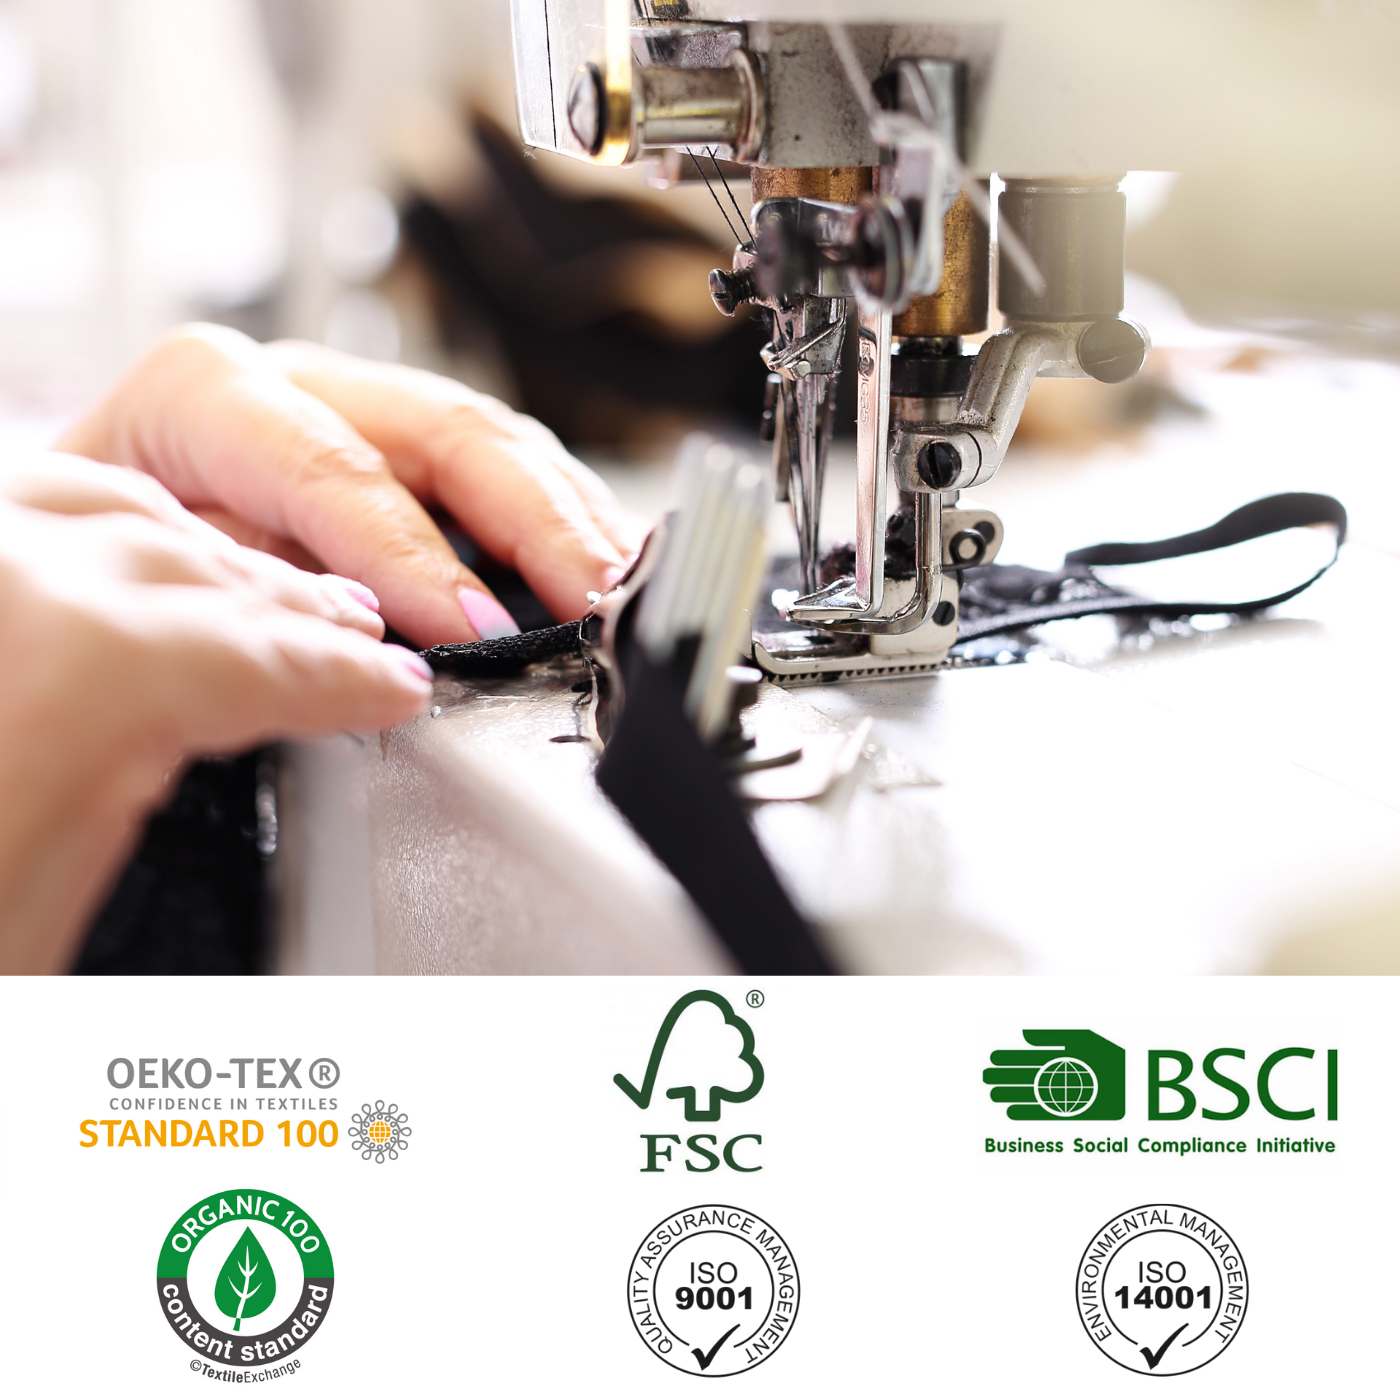 Manufacturer's Sustainability and Labour Certifications